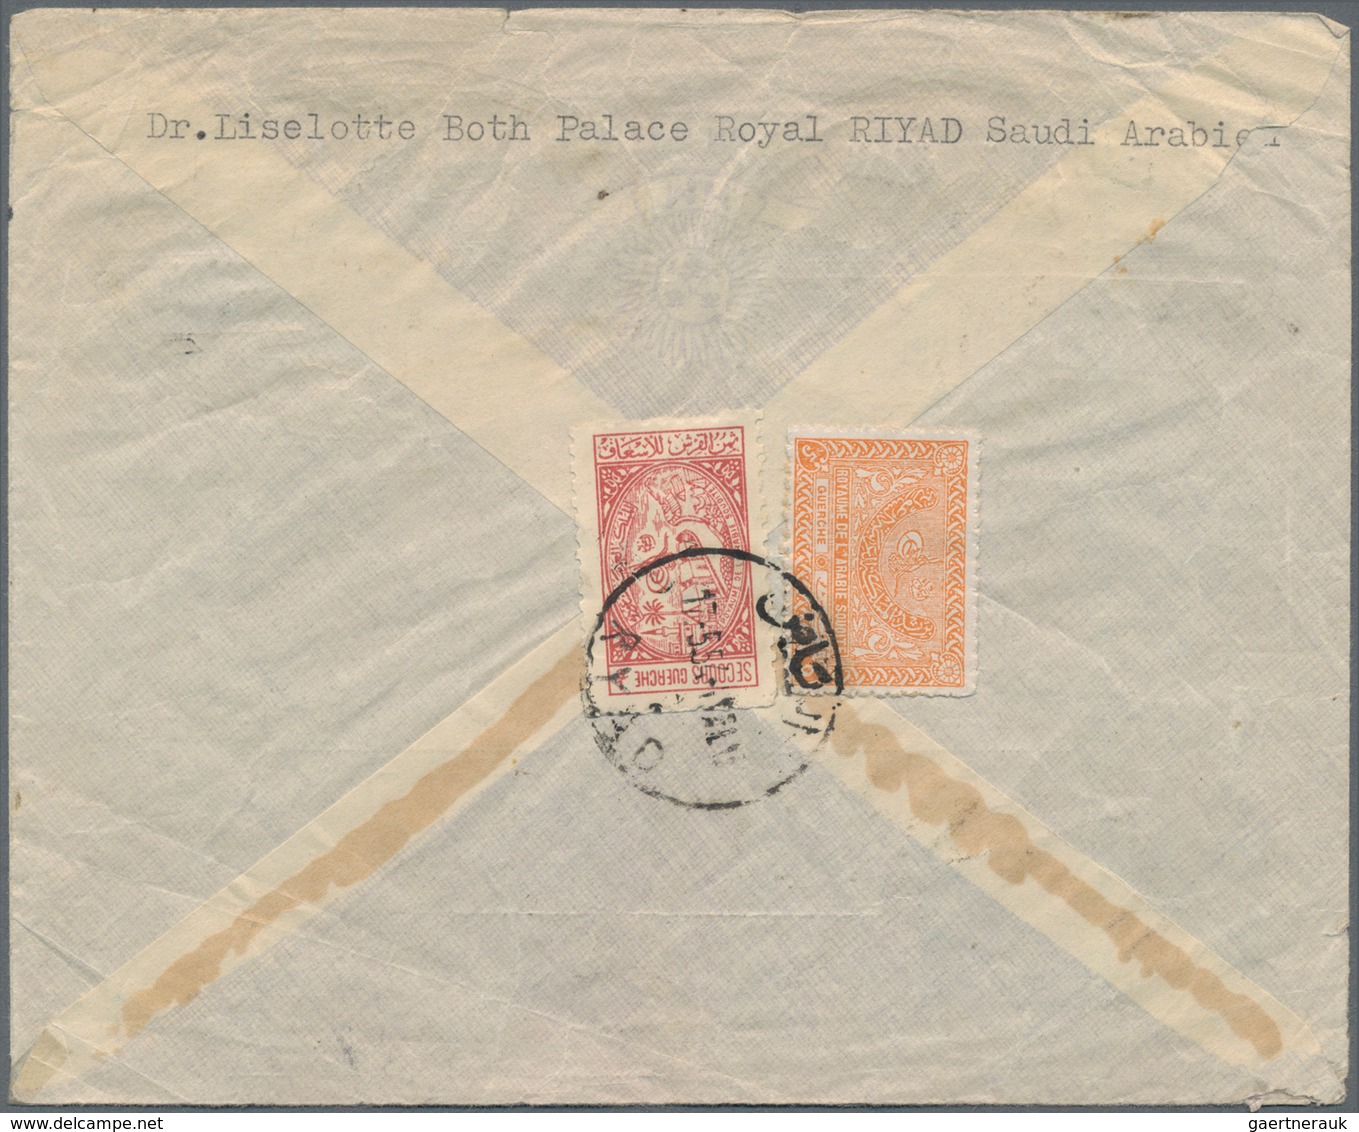 Saudi-Arabien: 1954 Illustrated Envelope With Multi-colour Oval Pictures Of Mecca Including The Kaab - Saudi Arabia